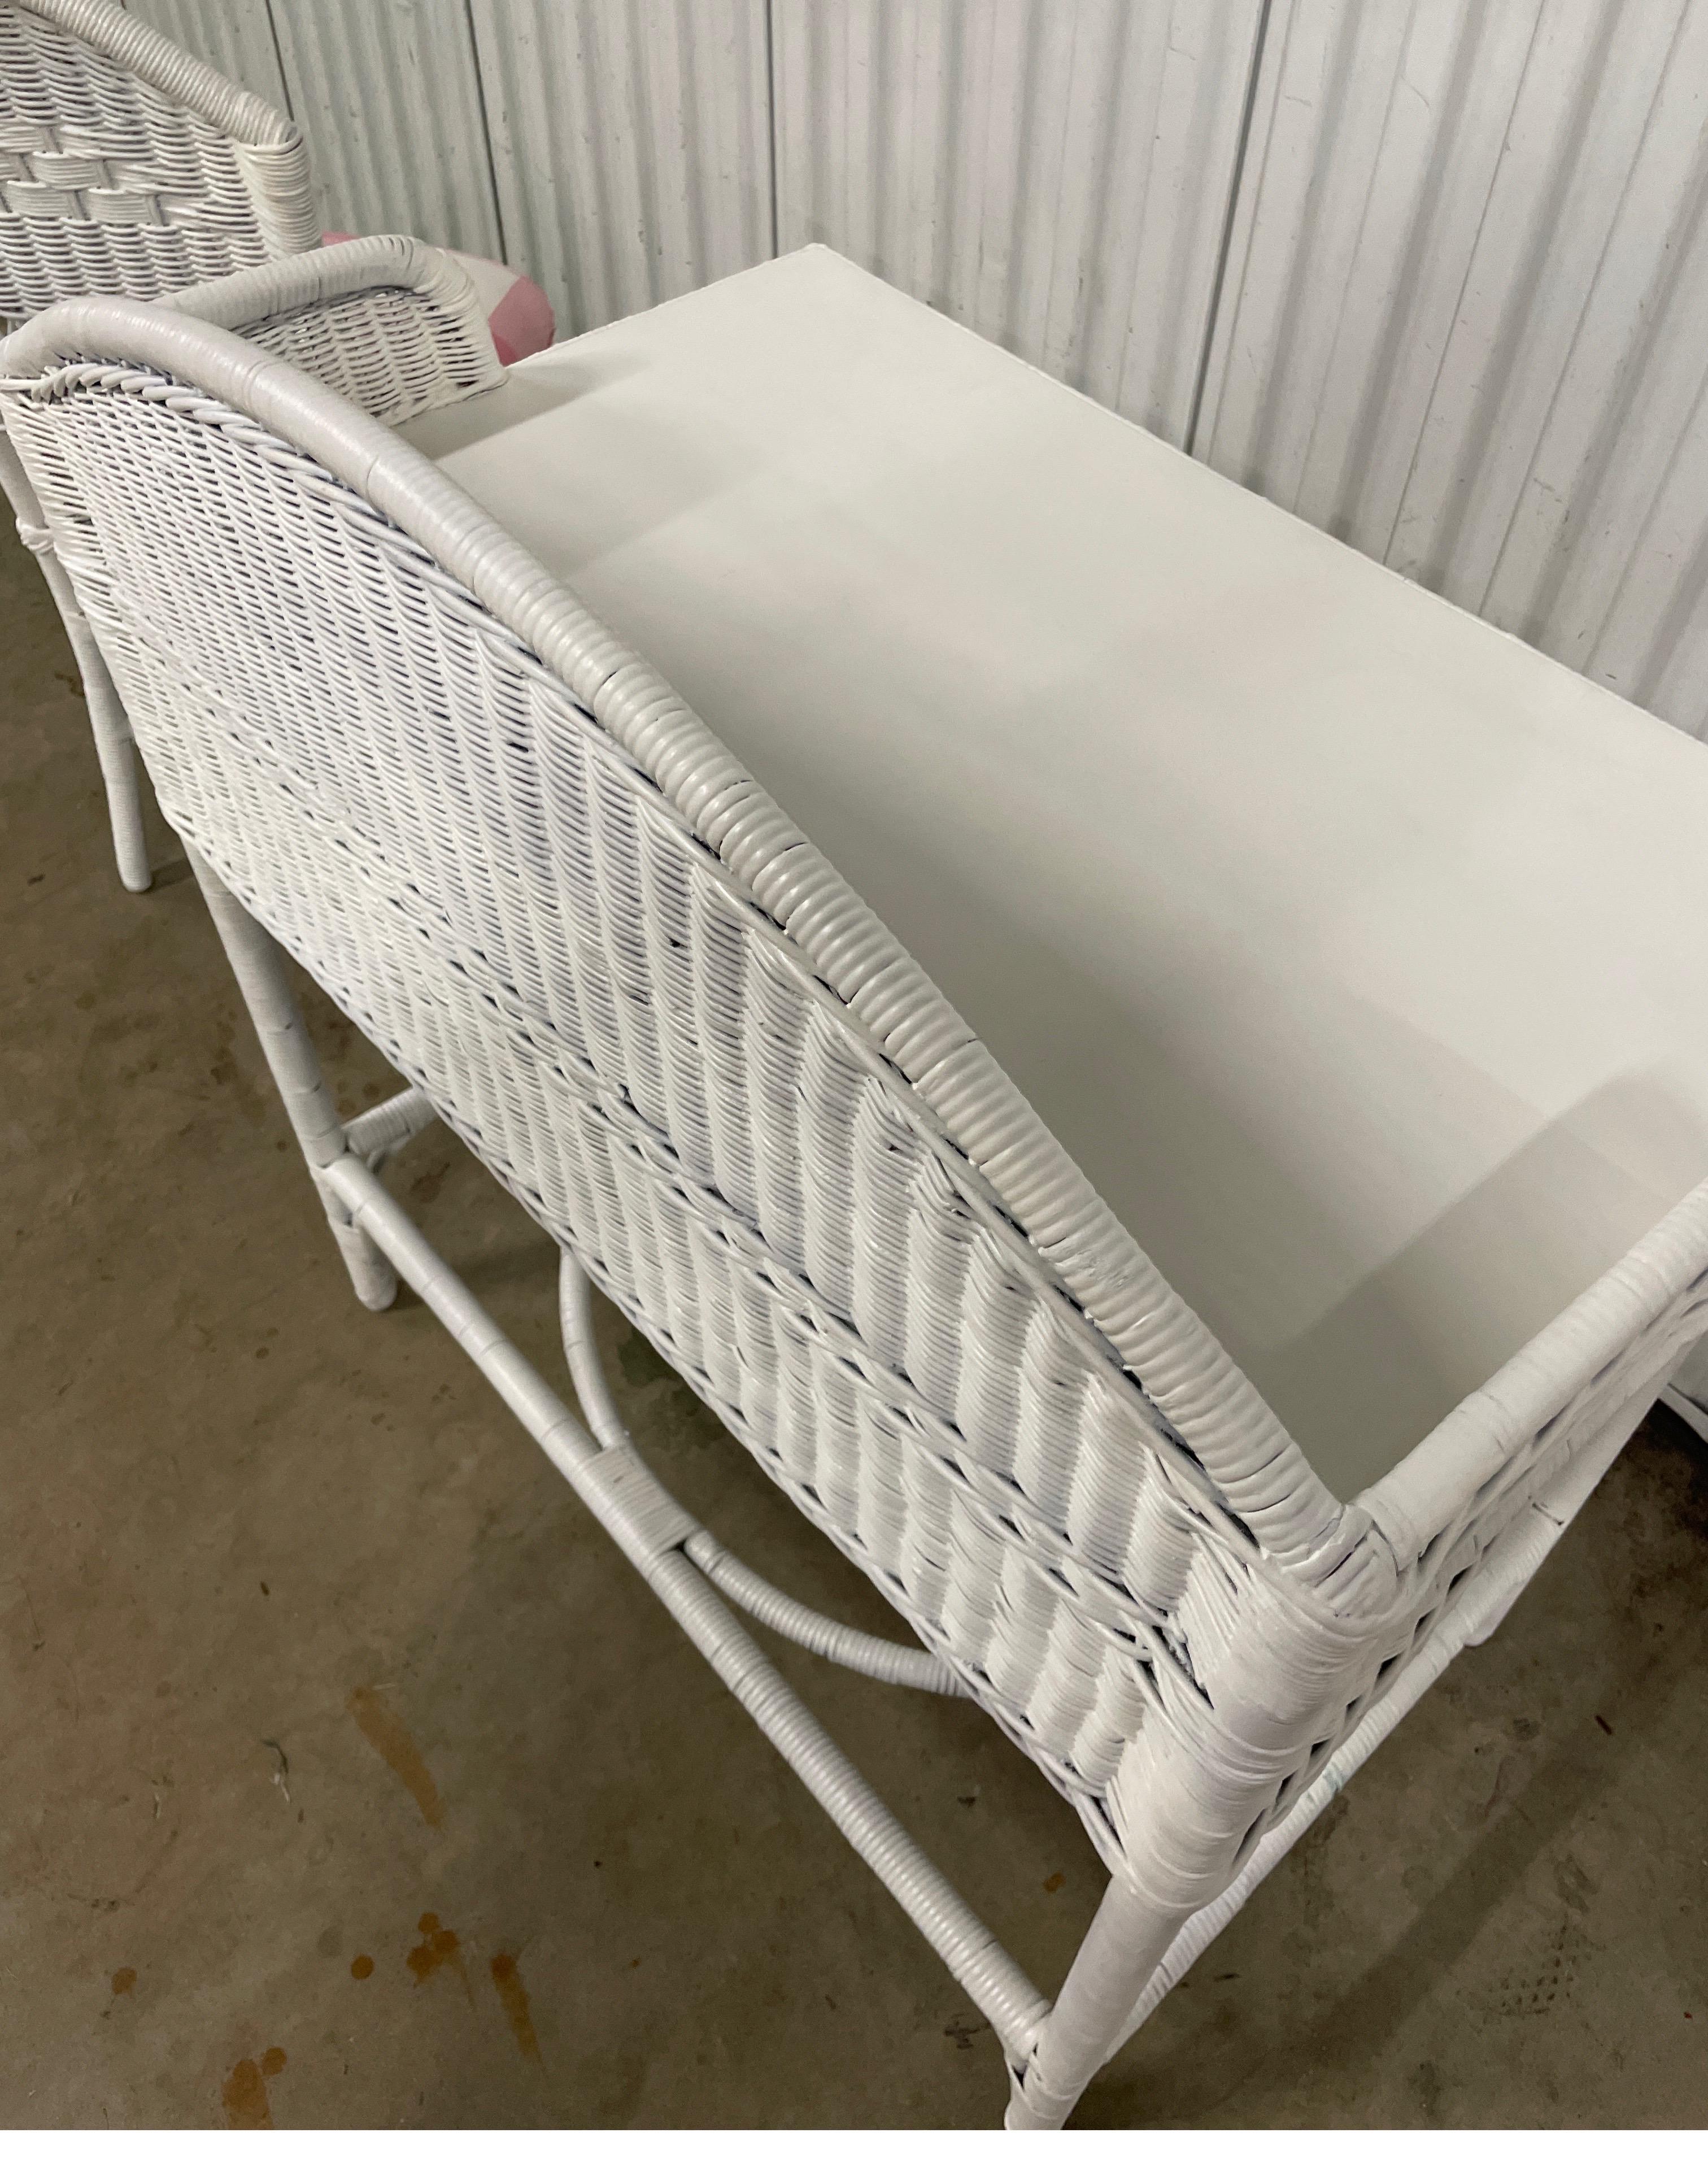 Antique White Wicker Dressing Table / Desk & Chair Set For Sale 8